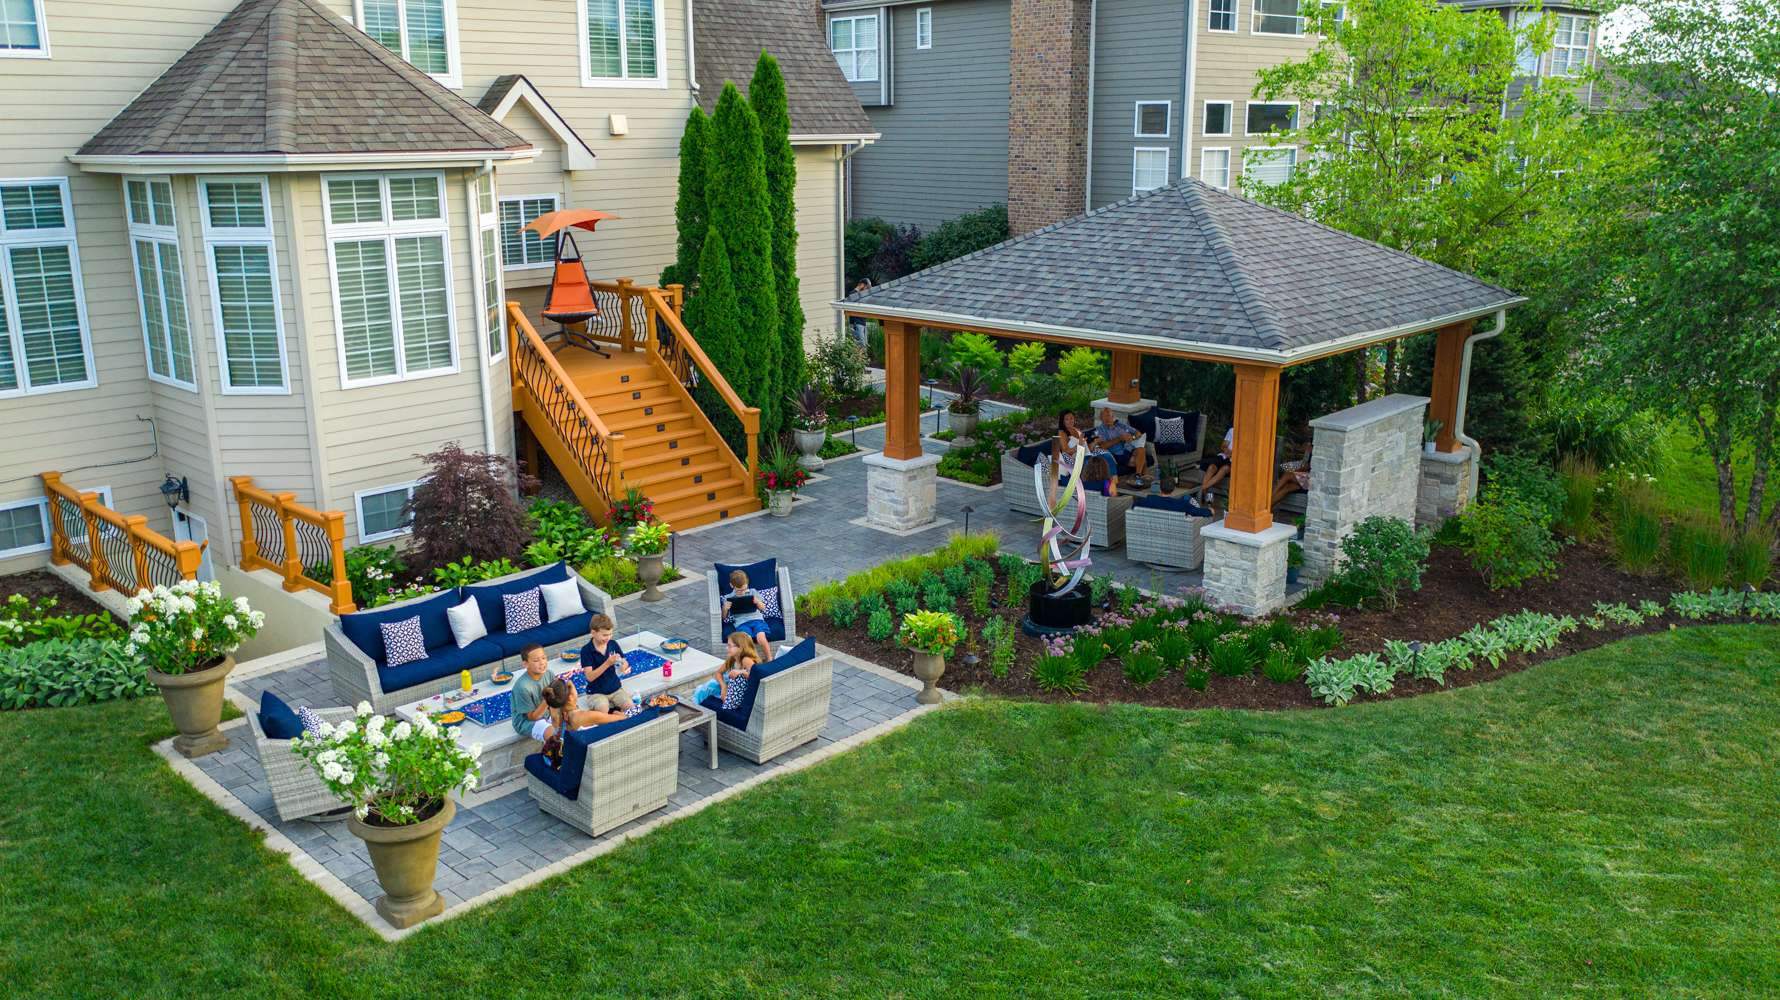 aerial-fire feature-sculpture-pergola-customer-patio-paver-seating-container-landscaping-plants-planting-lawn-steps